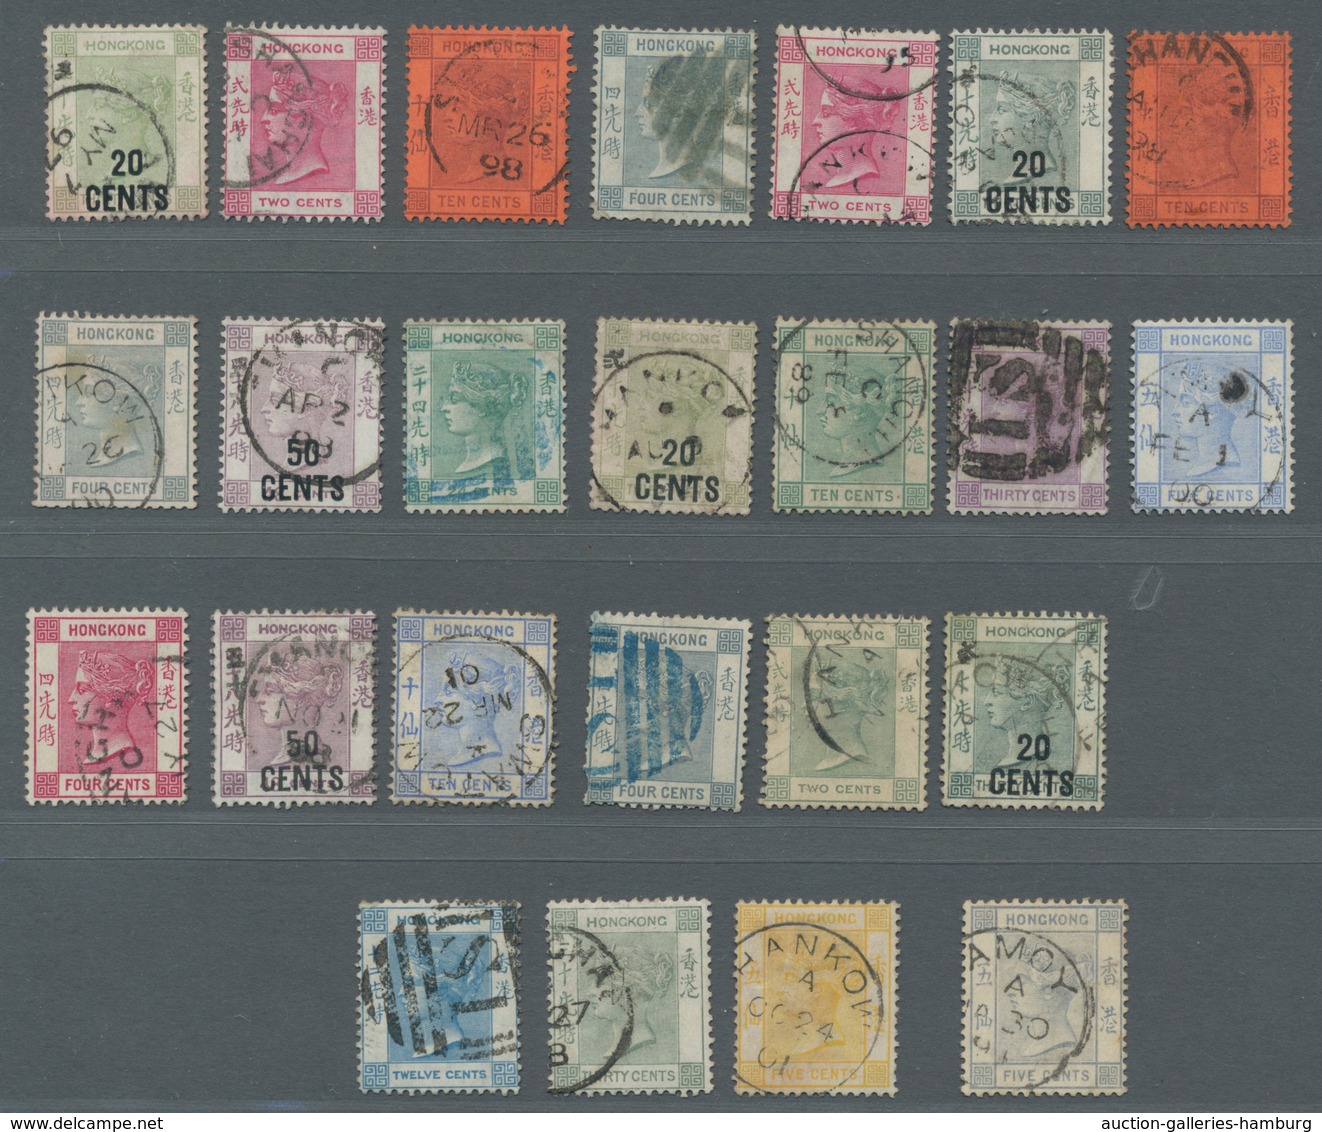 Hongkong - Treaty Ports: 1880-1900 (c.) TREATY PORTS cancellations, nice lot of 24 stamps showing a